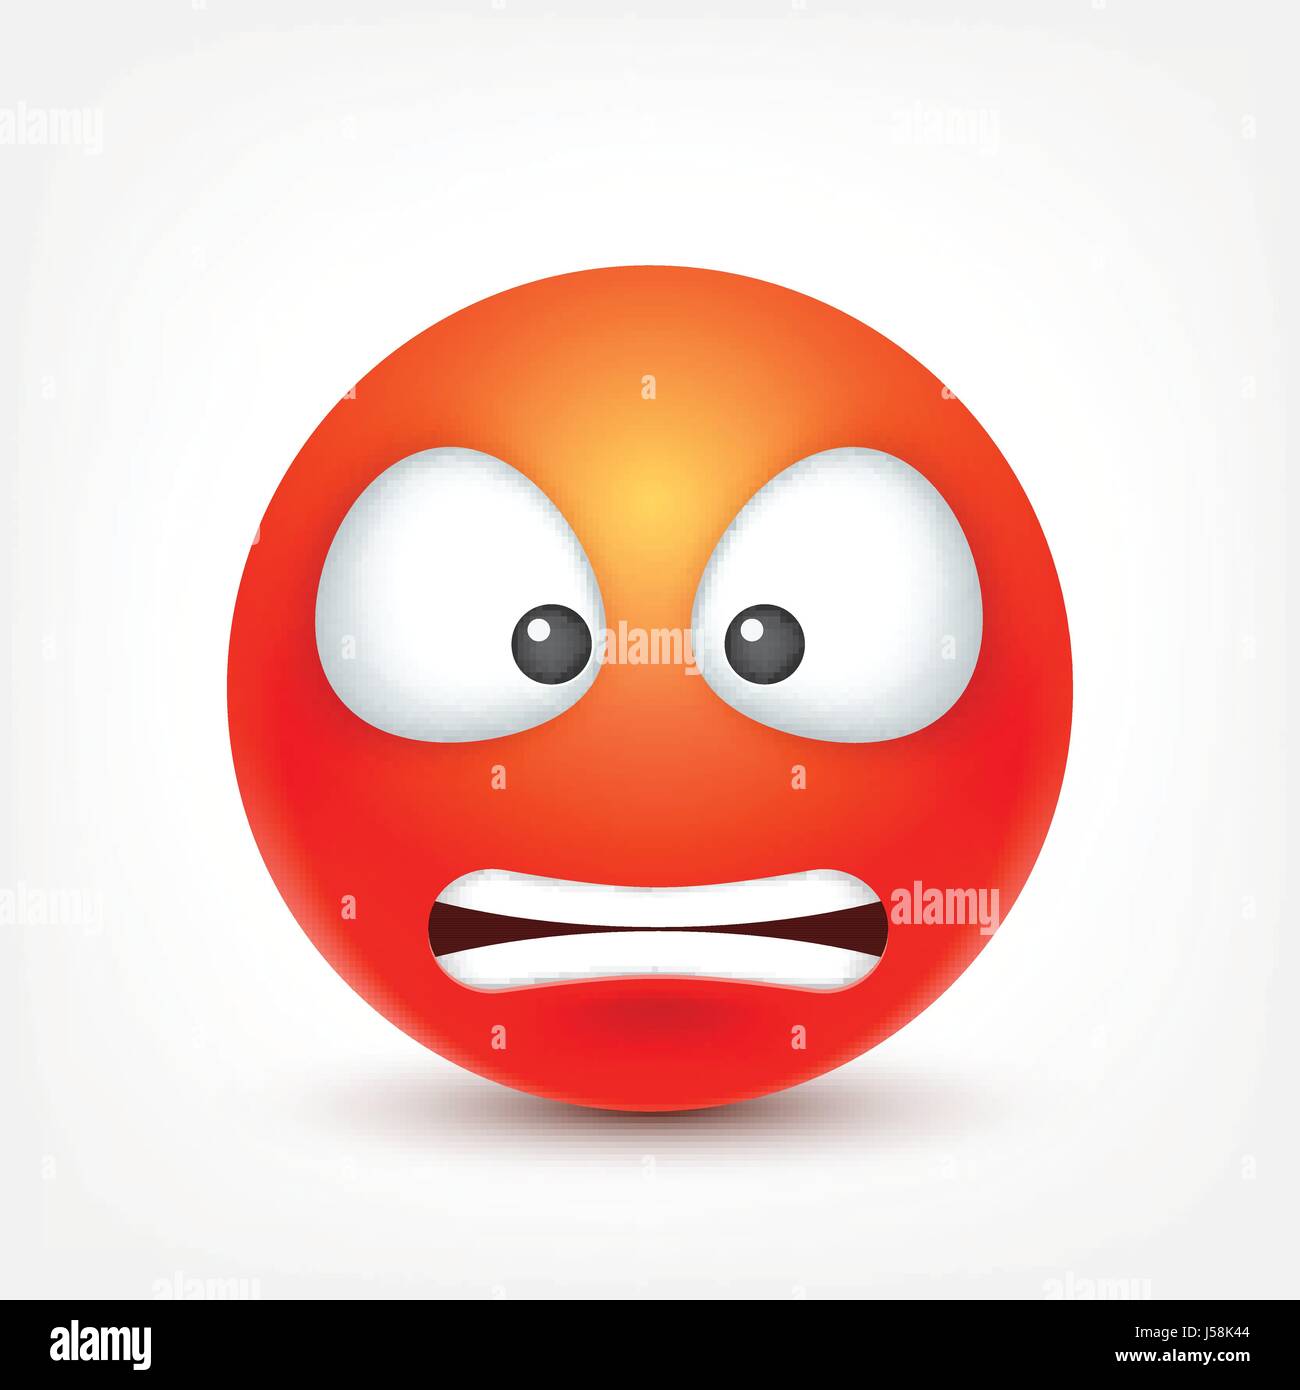 Smiley,angry emoticon. Red face with emotions. Facial expression. 3d realistic emoji. Funny cartoon character.Mood. Web icon. Vector illustration. Stock Vector